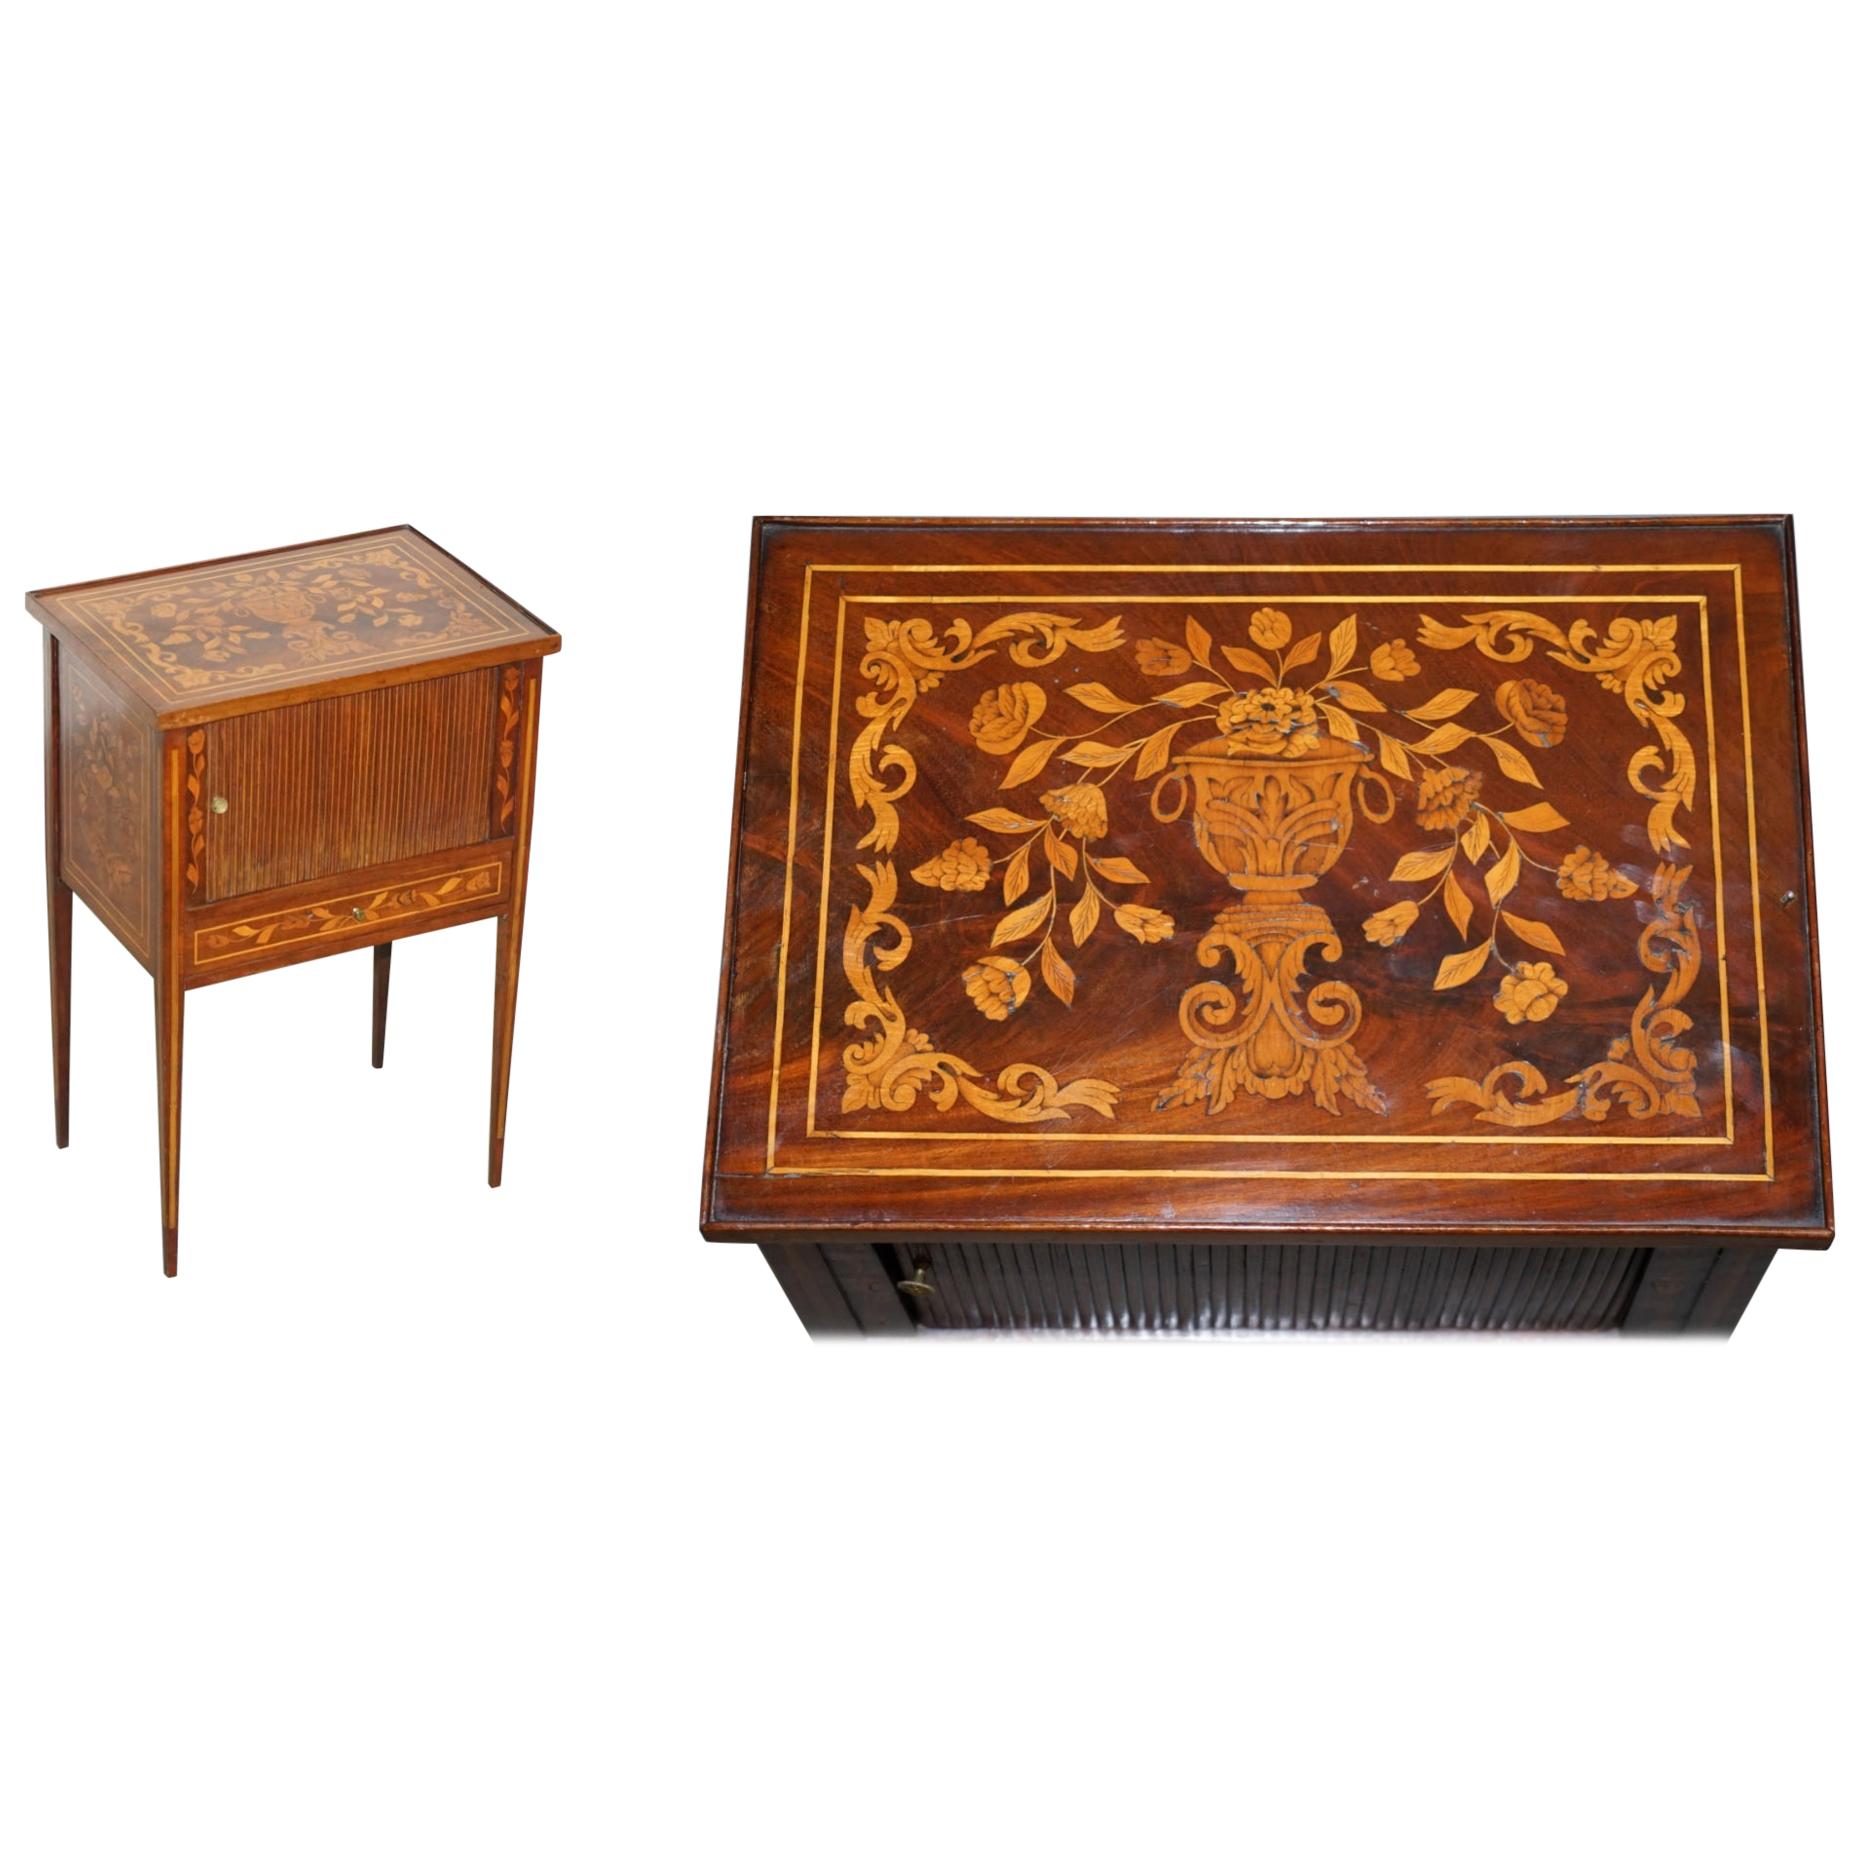 Rare 19th Century Dutch Marquetry Inlaid Side Table with Tambour Fronted Door For Sale